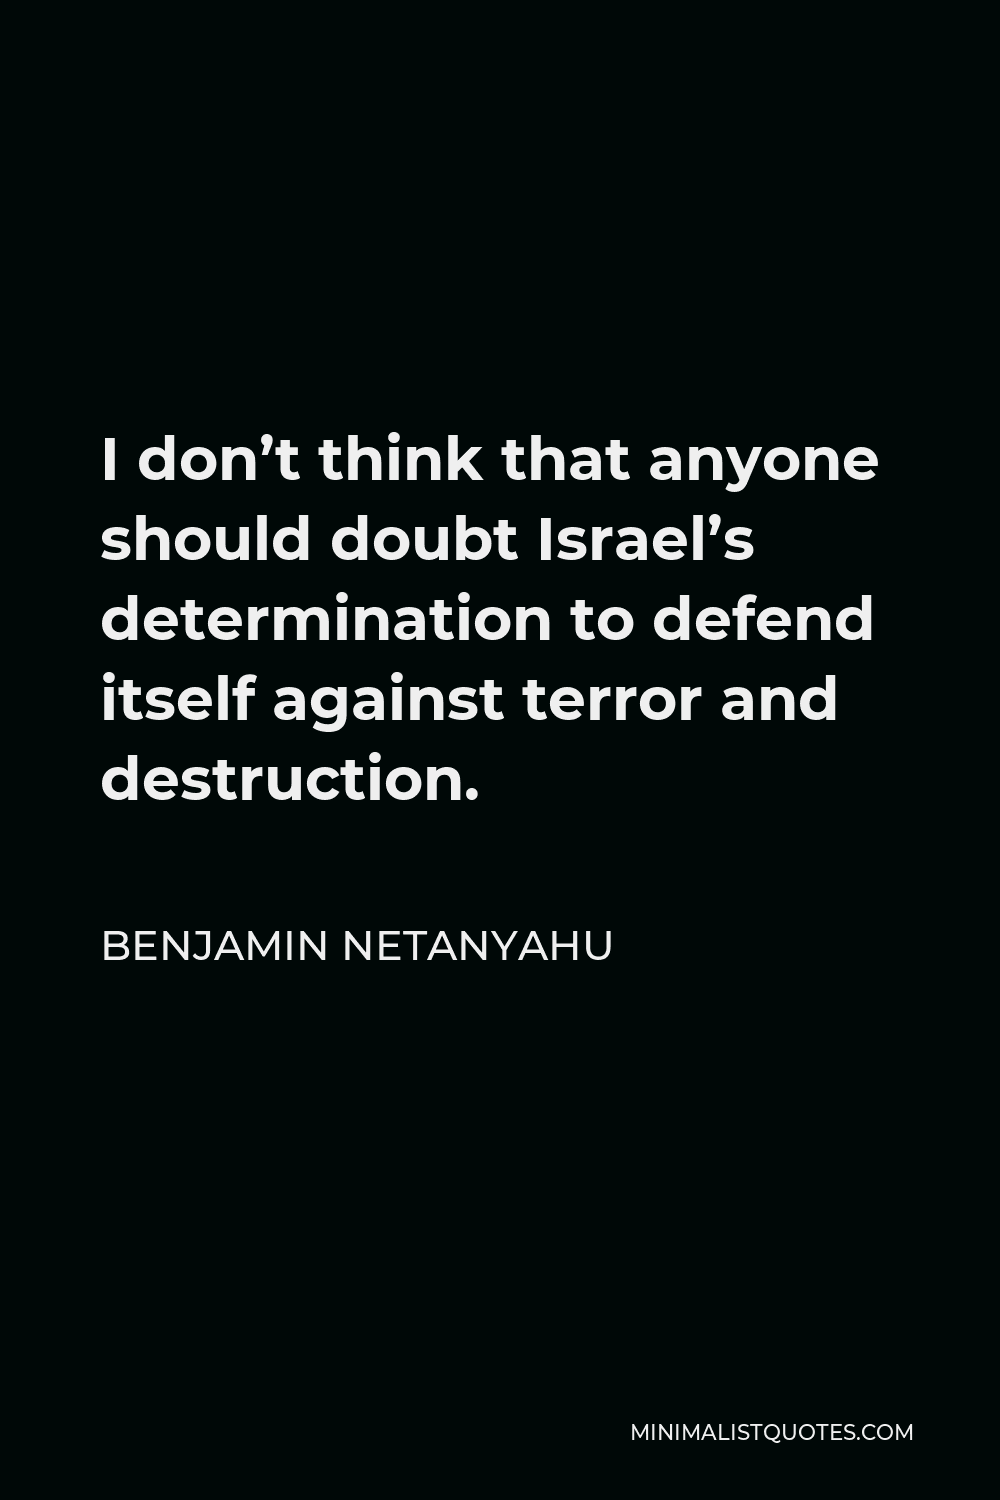 Benjamin Netanyahu Quote - I don’t think that anyone should doubt Israel’s determination to defend itself against terror and destruction.